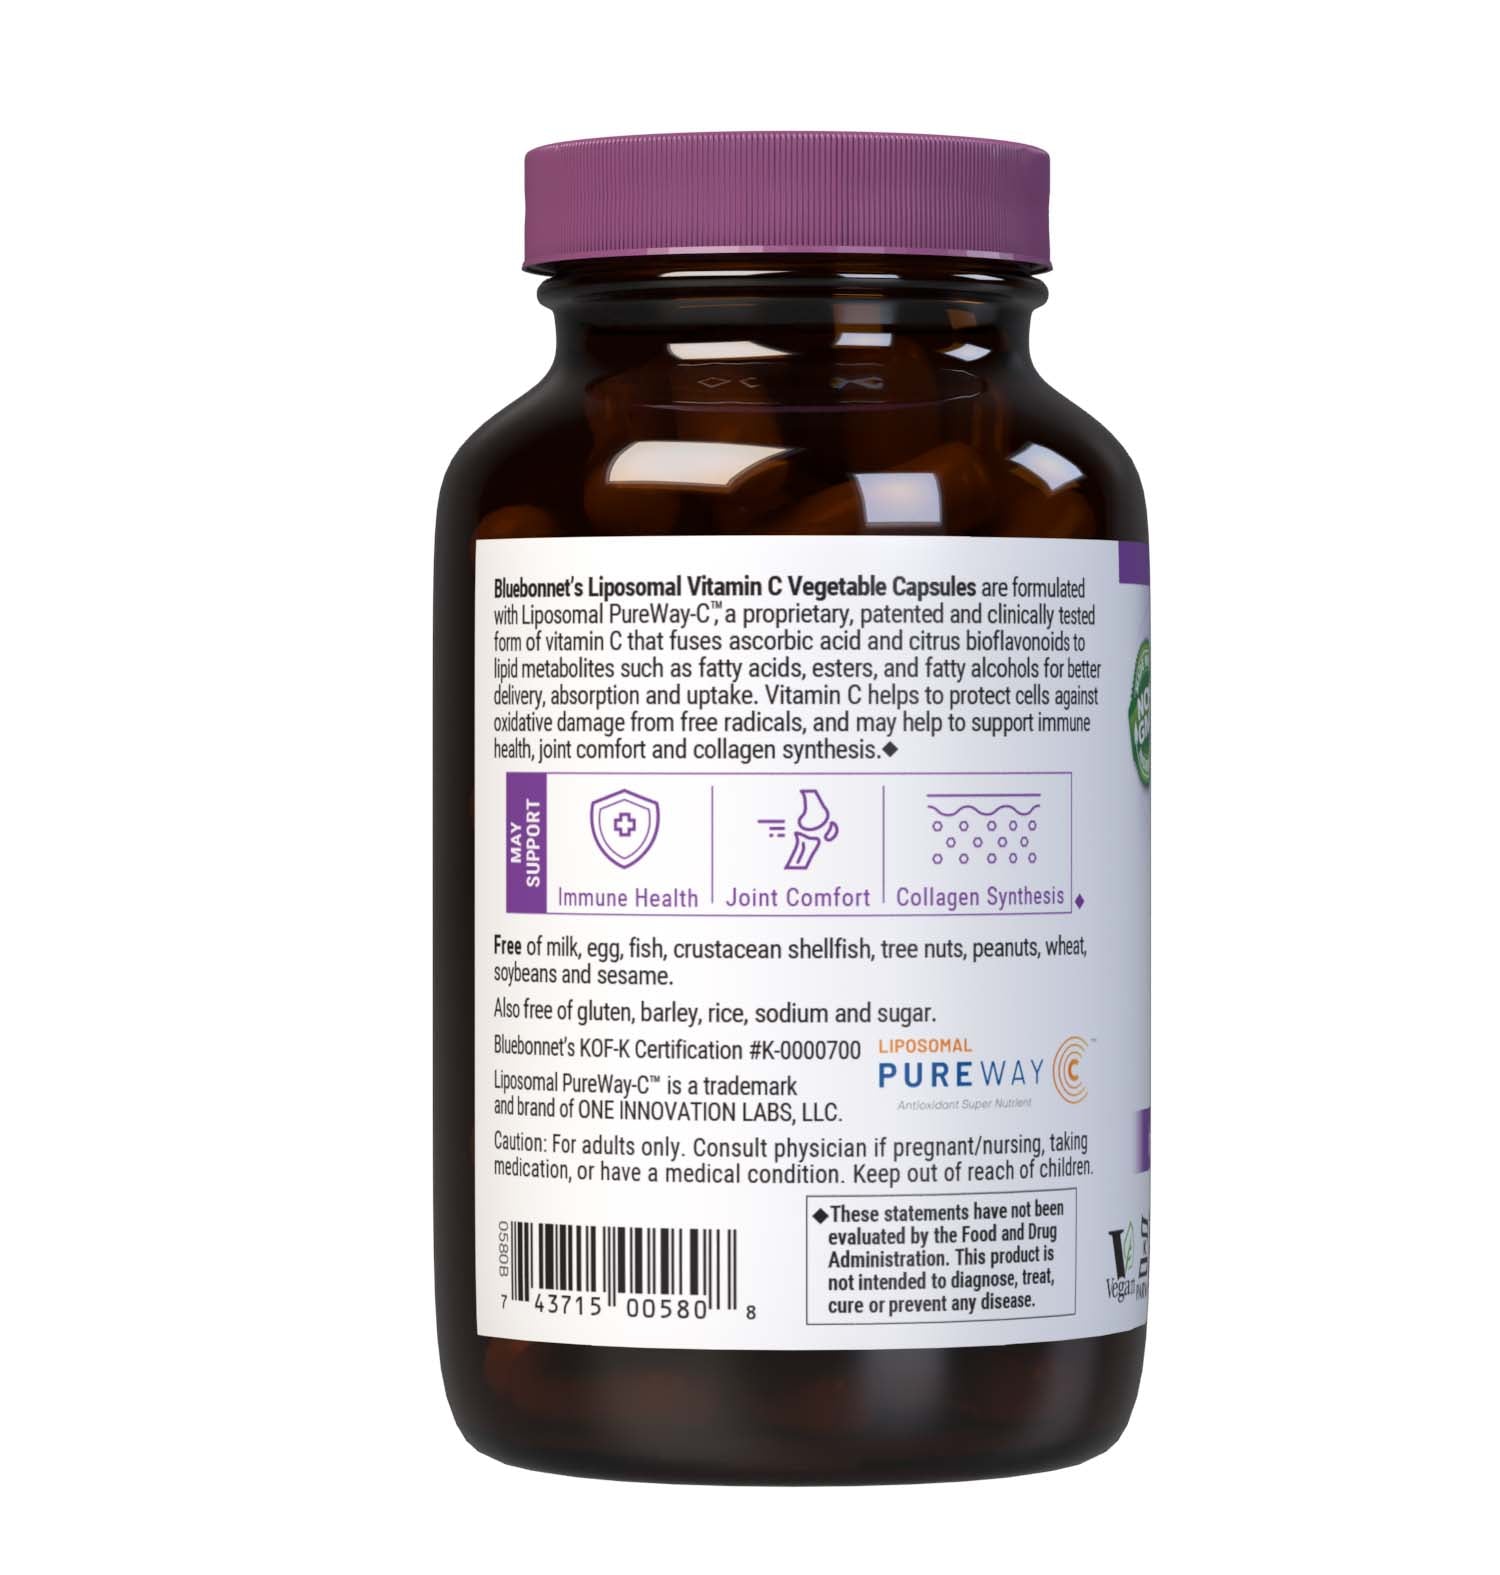 Formulated with Liposomal Pureway-C, 90 Vegetable Capsules a patented and clinically tested form of vitamin C that fuses ascorbic acid and citrus bioflavonoids to lipid metabolites such as fatty acids, esters, and fatty alcohols for better delivery, absorption and uptake to help support immune health, joint comfort & collagen synthesis. Description panel. #size_90 count